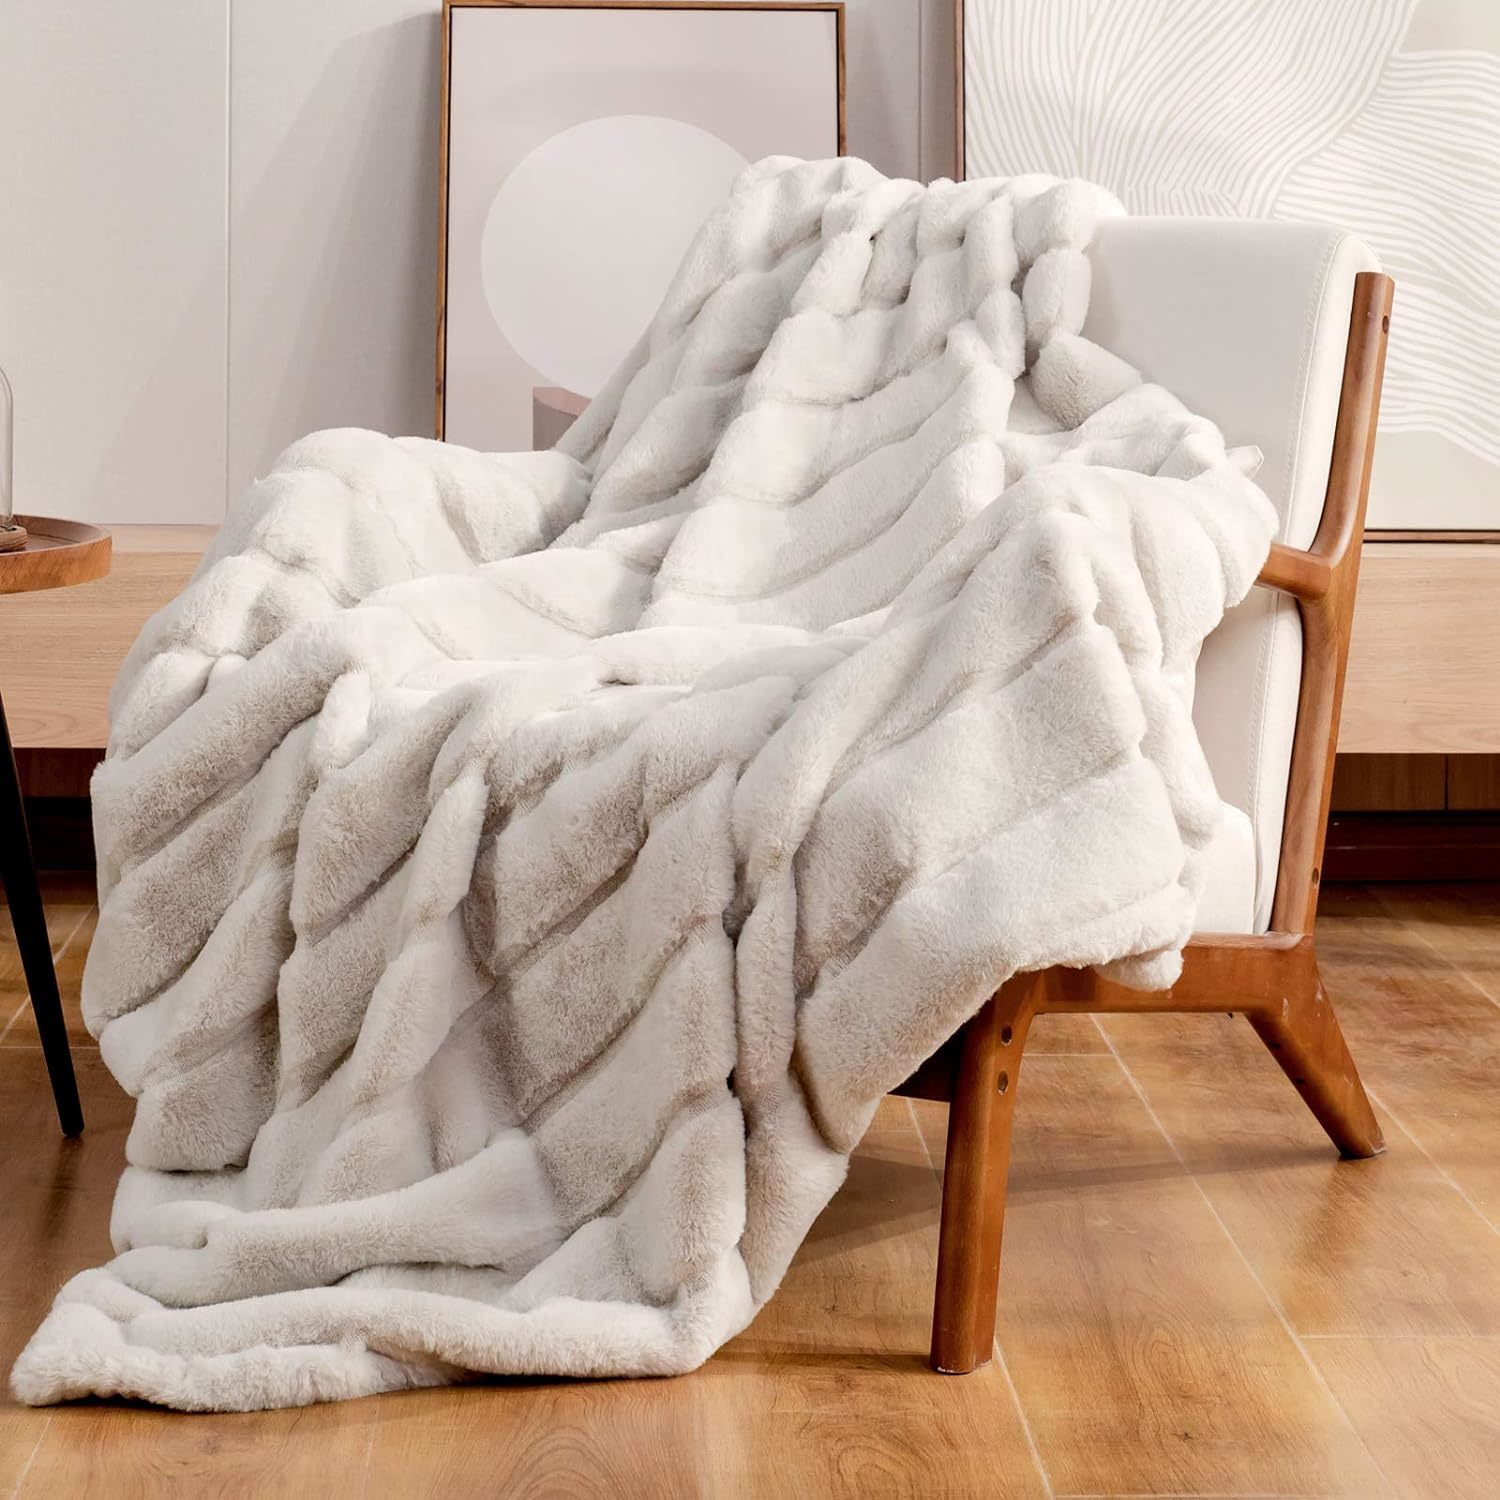 Cozy Bliss Luxury Super Soft Striped Faux Fur Throw Blanket For Couch,, Beige). - $77.92